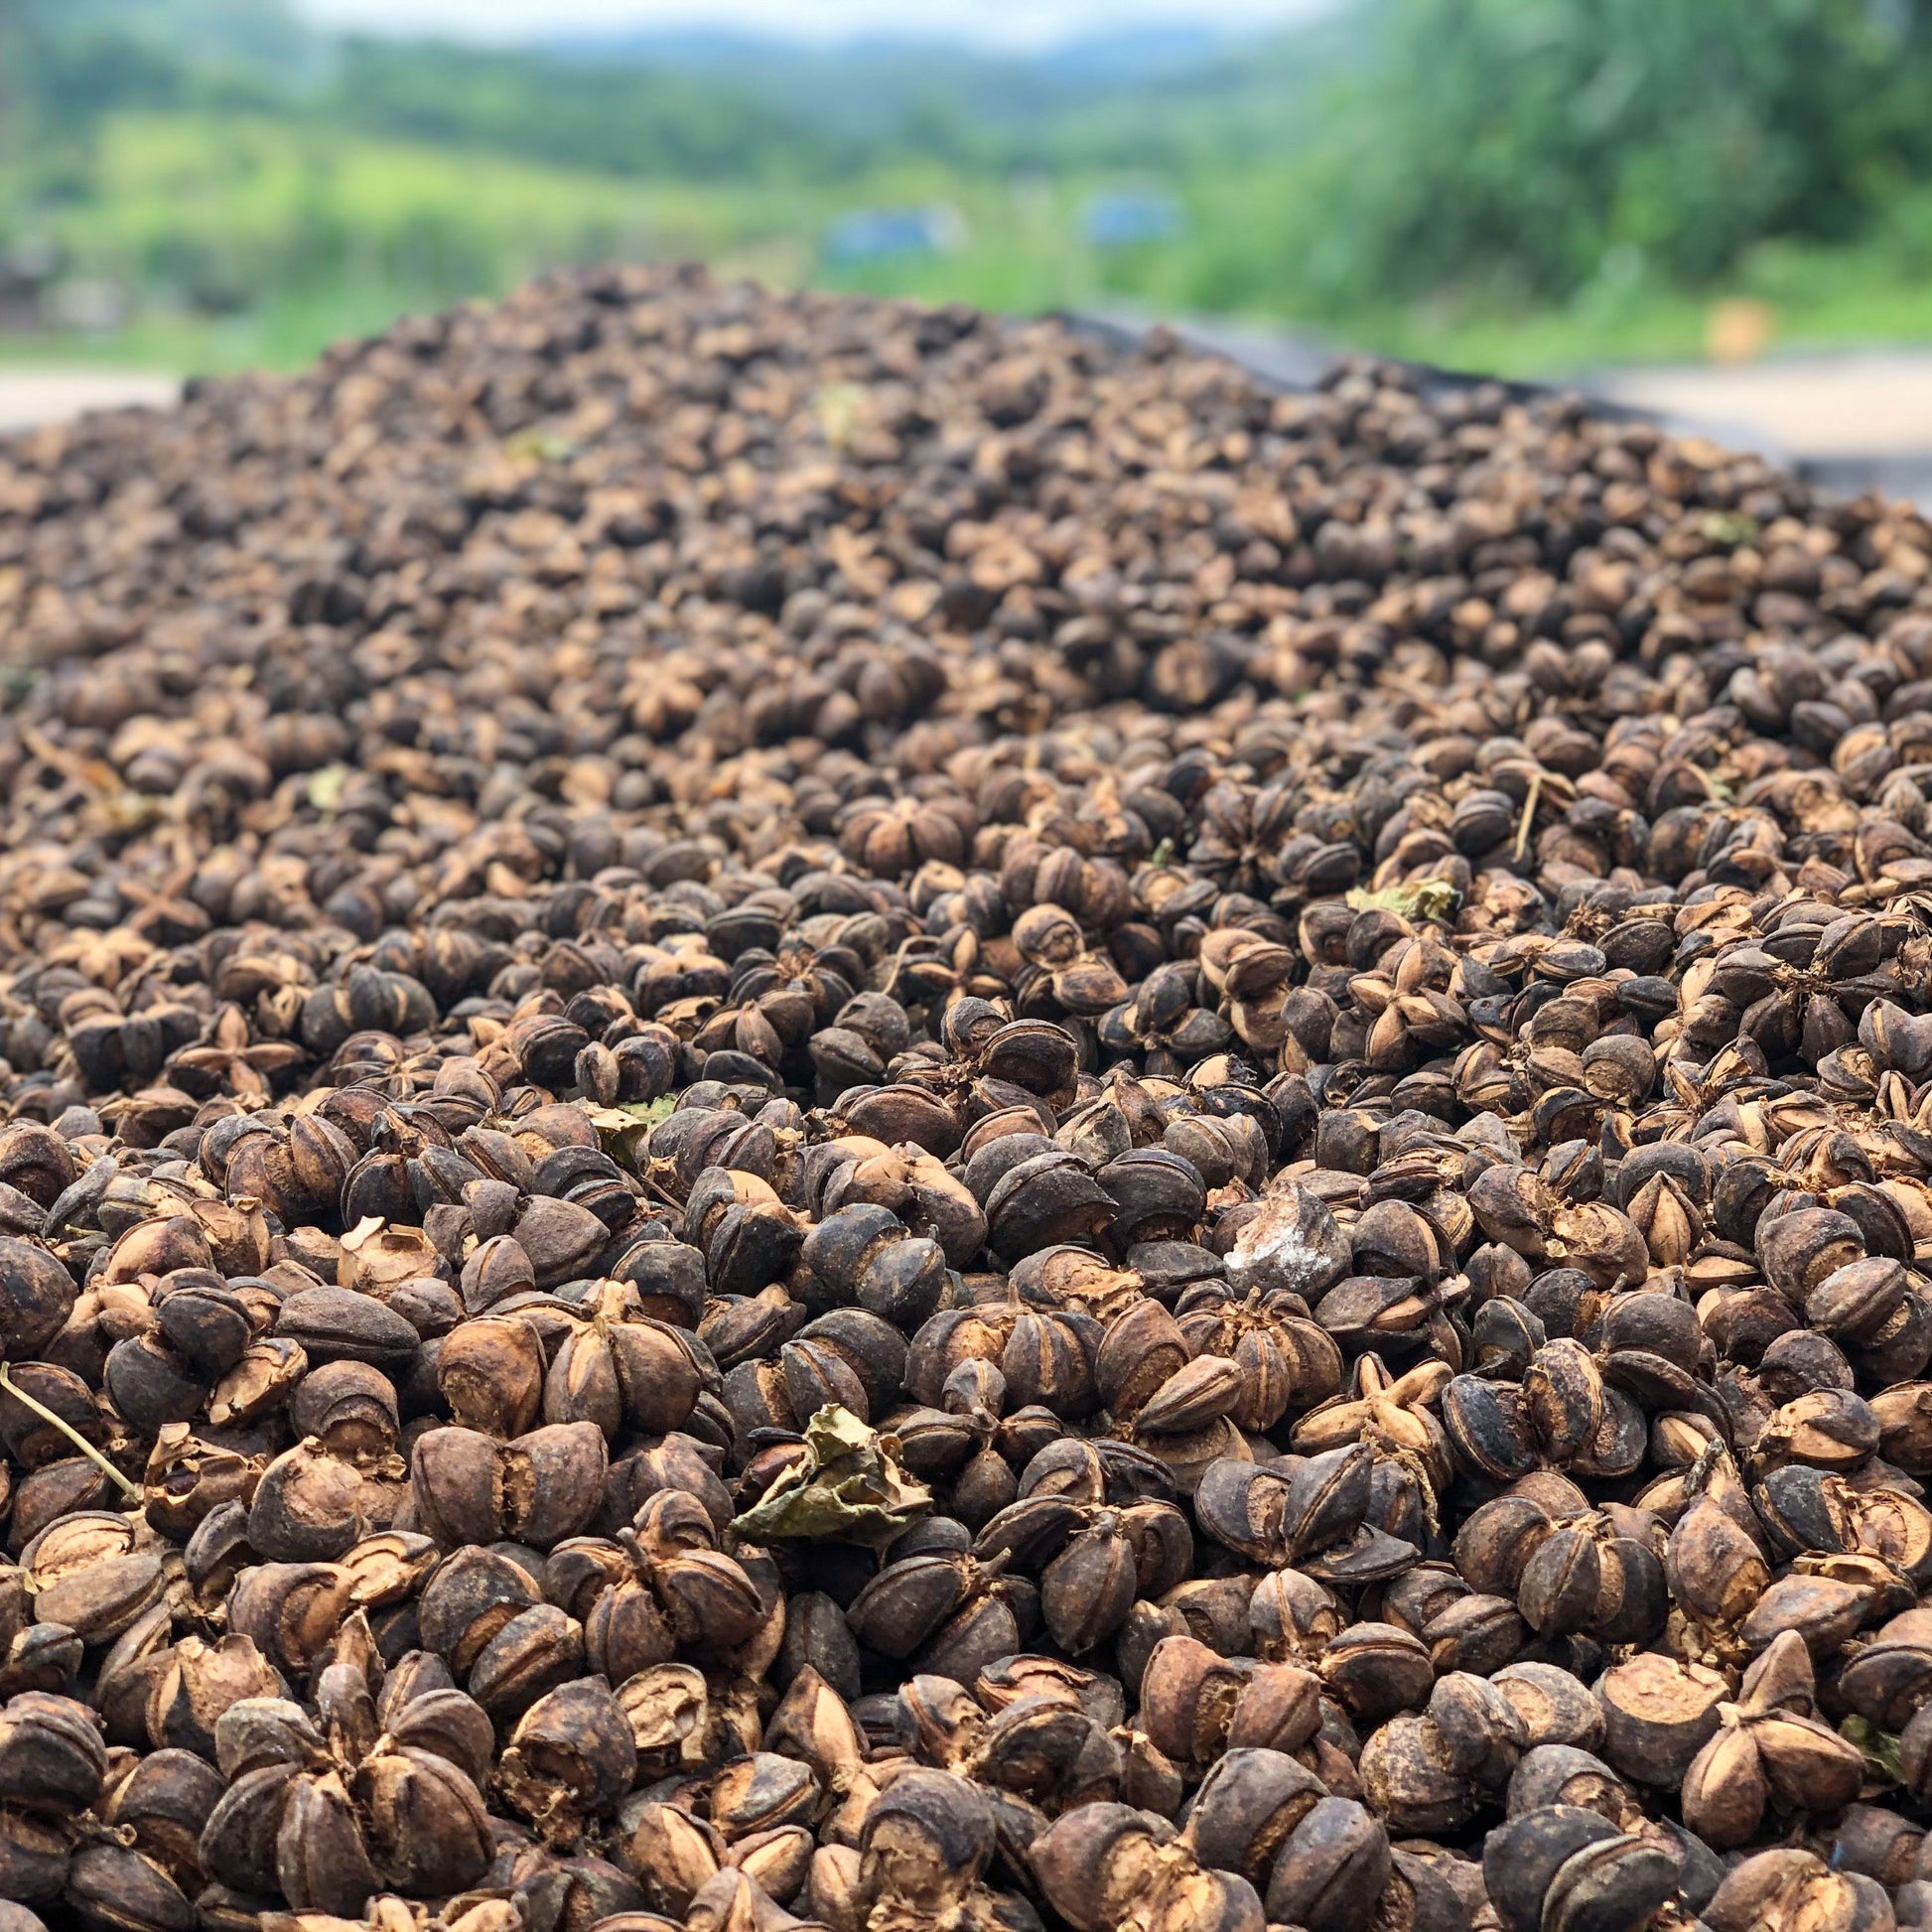 A large pile of freshly harvested organic sacha inchi seed pods, also known as Inca Peanuts.